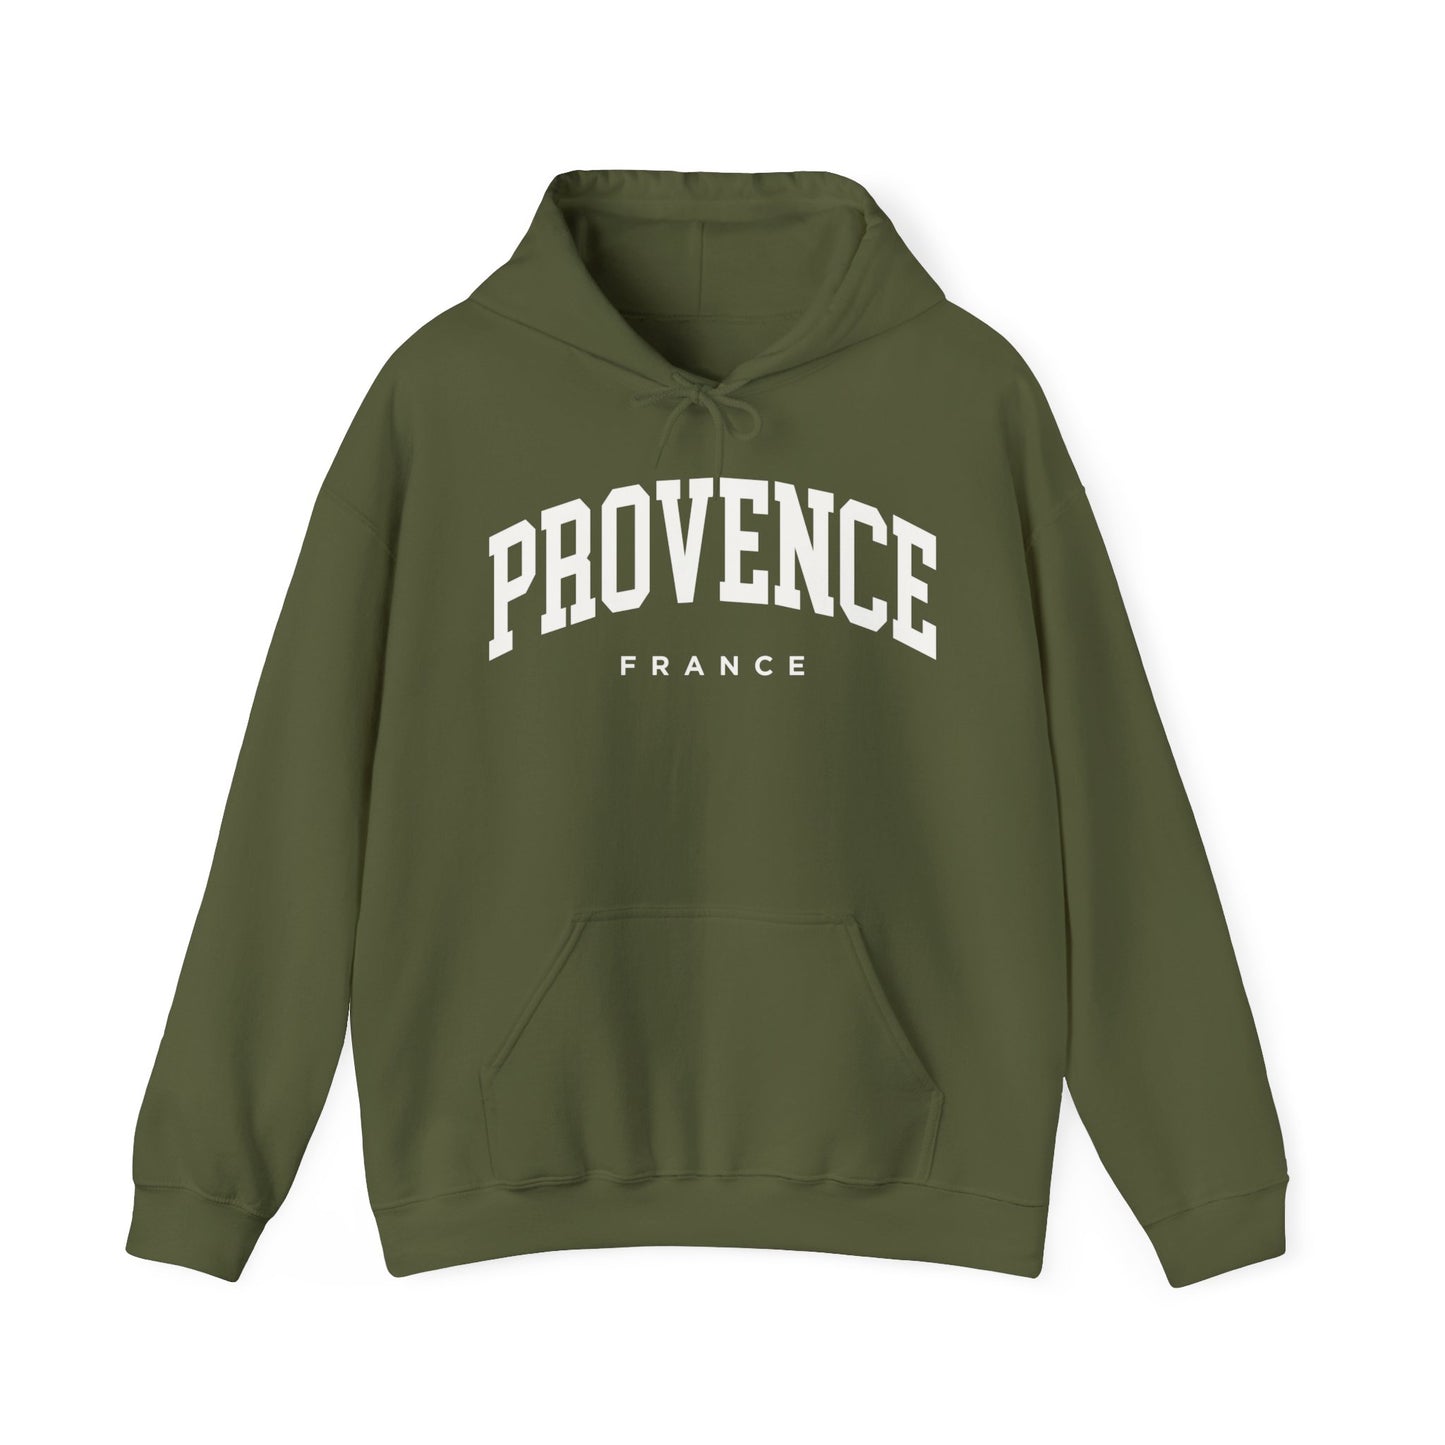 Provence France Hoodie